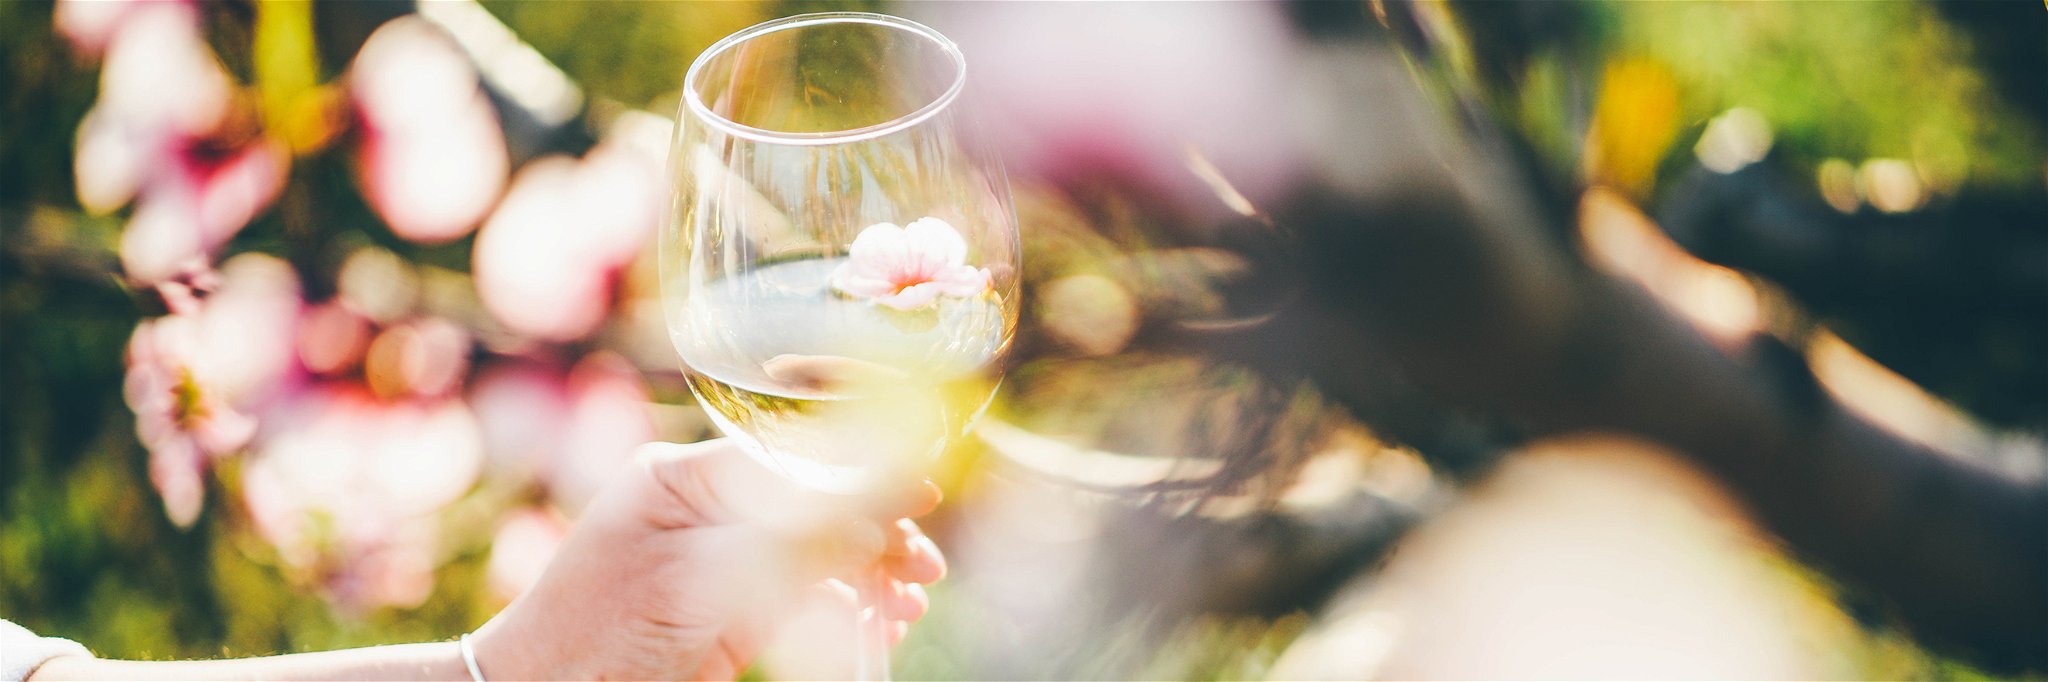 Wines that resemble the very essence of spring